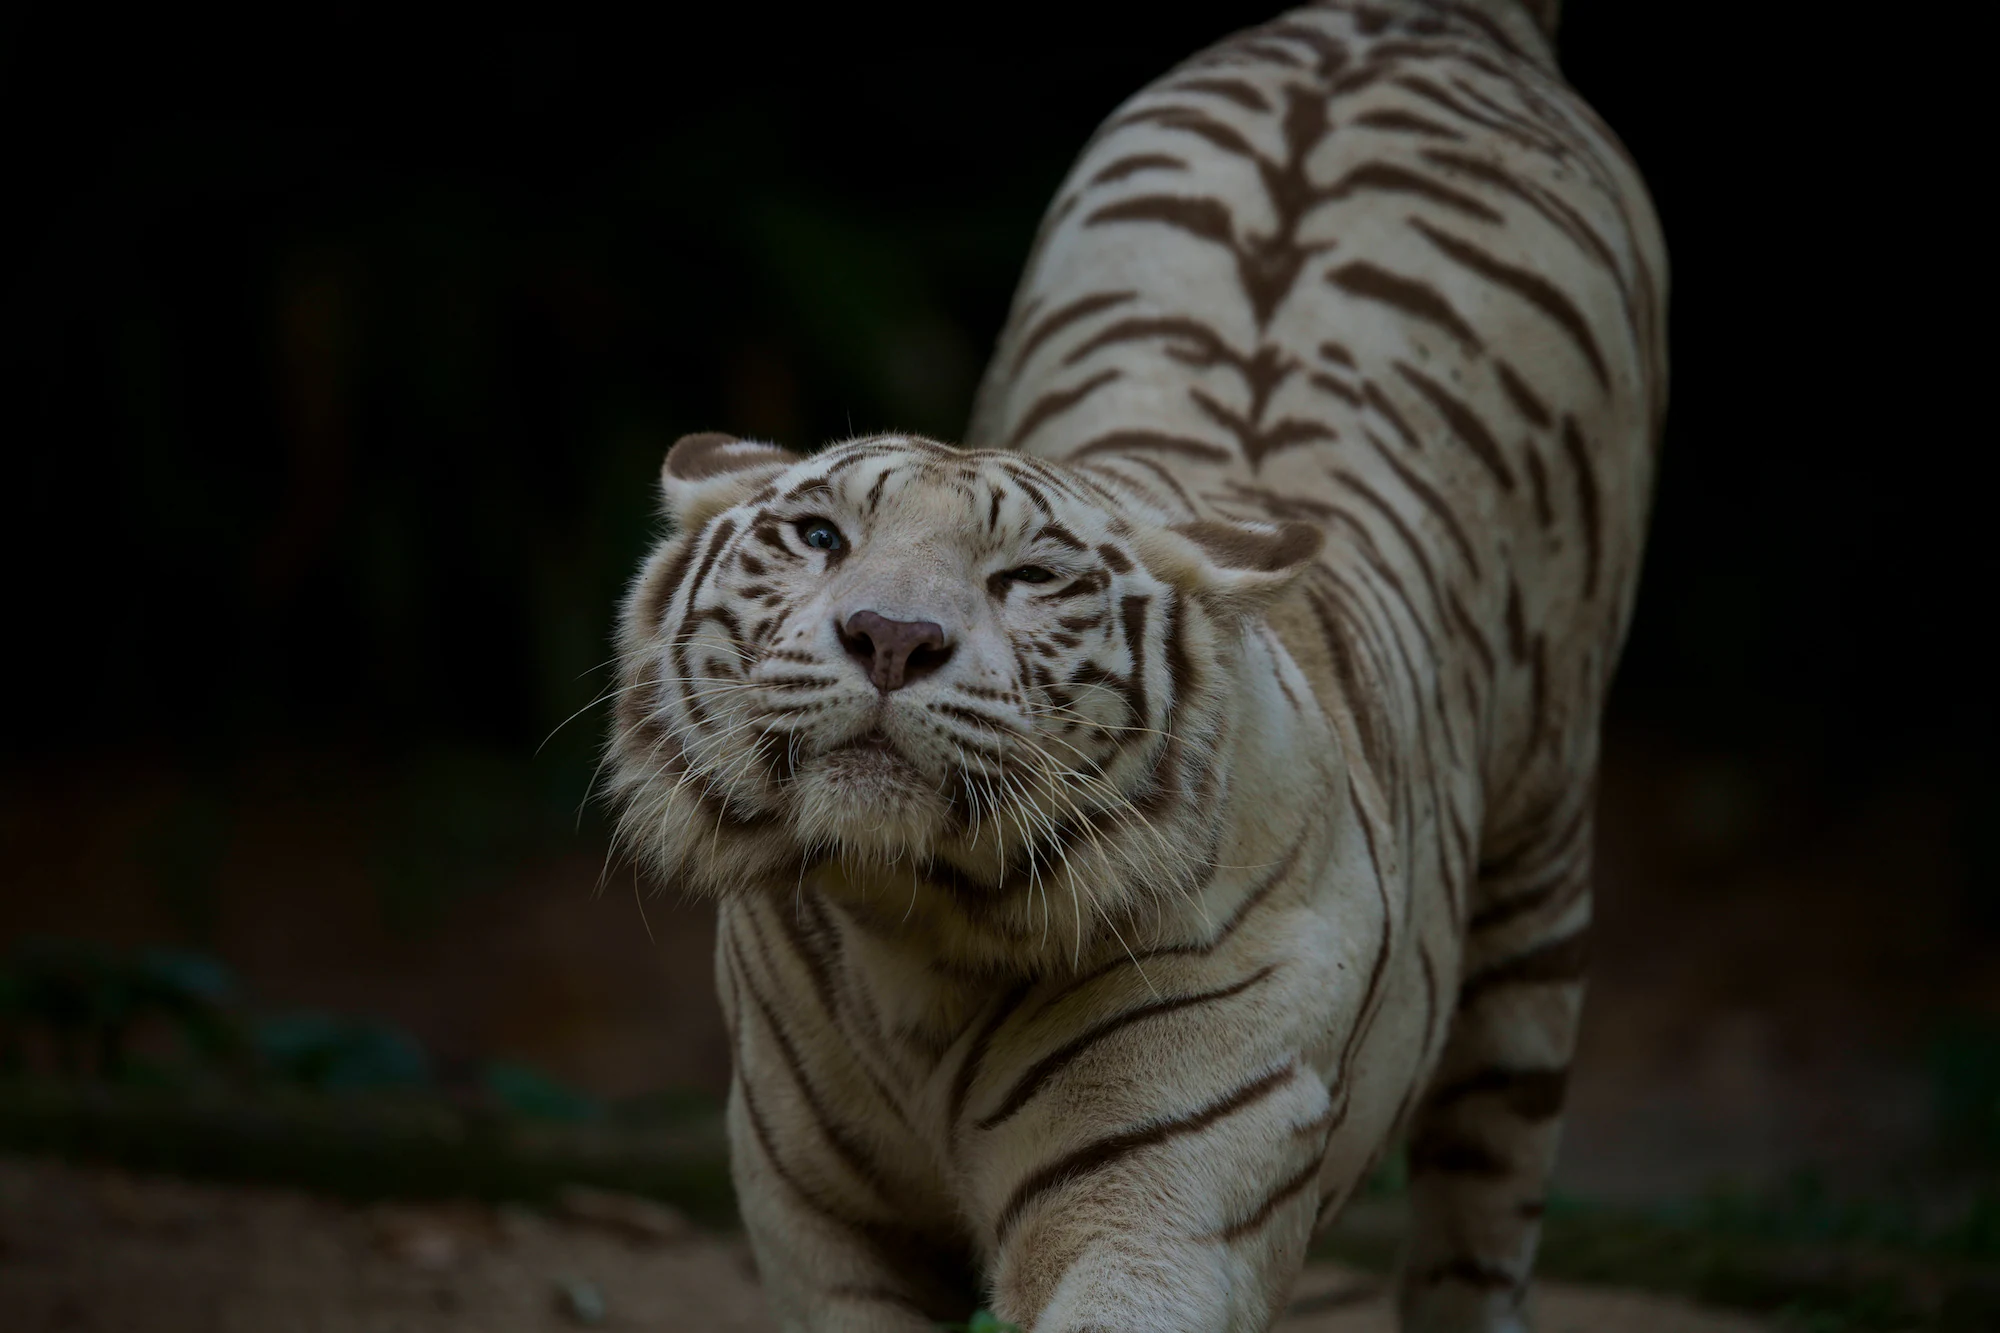 Sony's Alpha 7R IV's Animal Eye Focus effectively tracks the moving tiger for a top quality shot